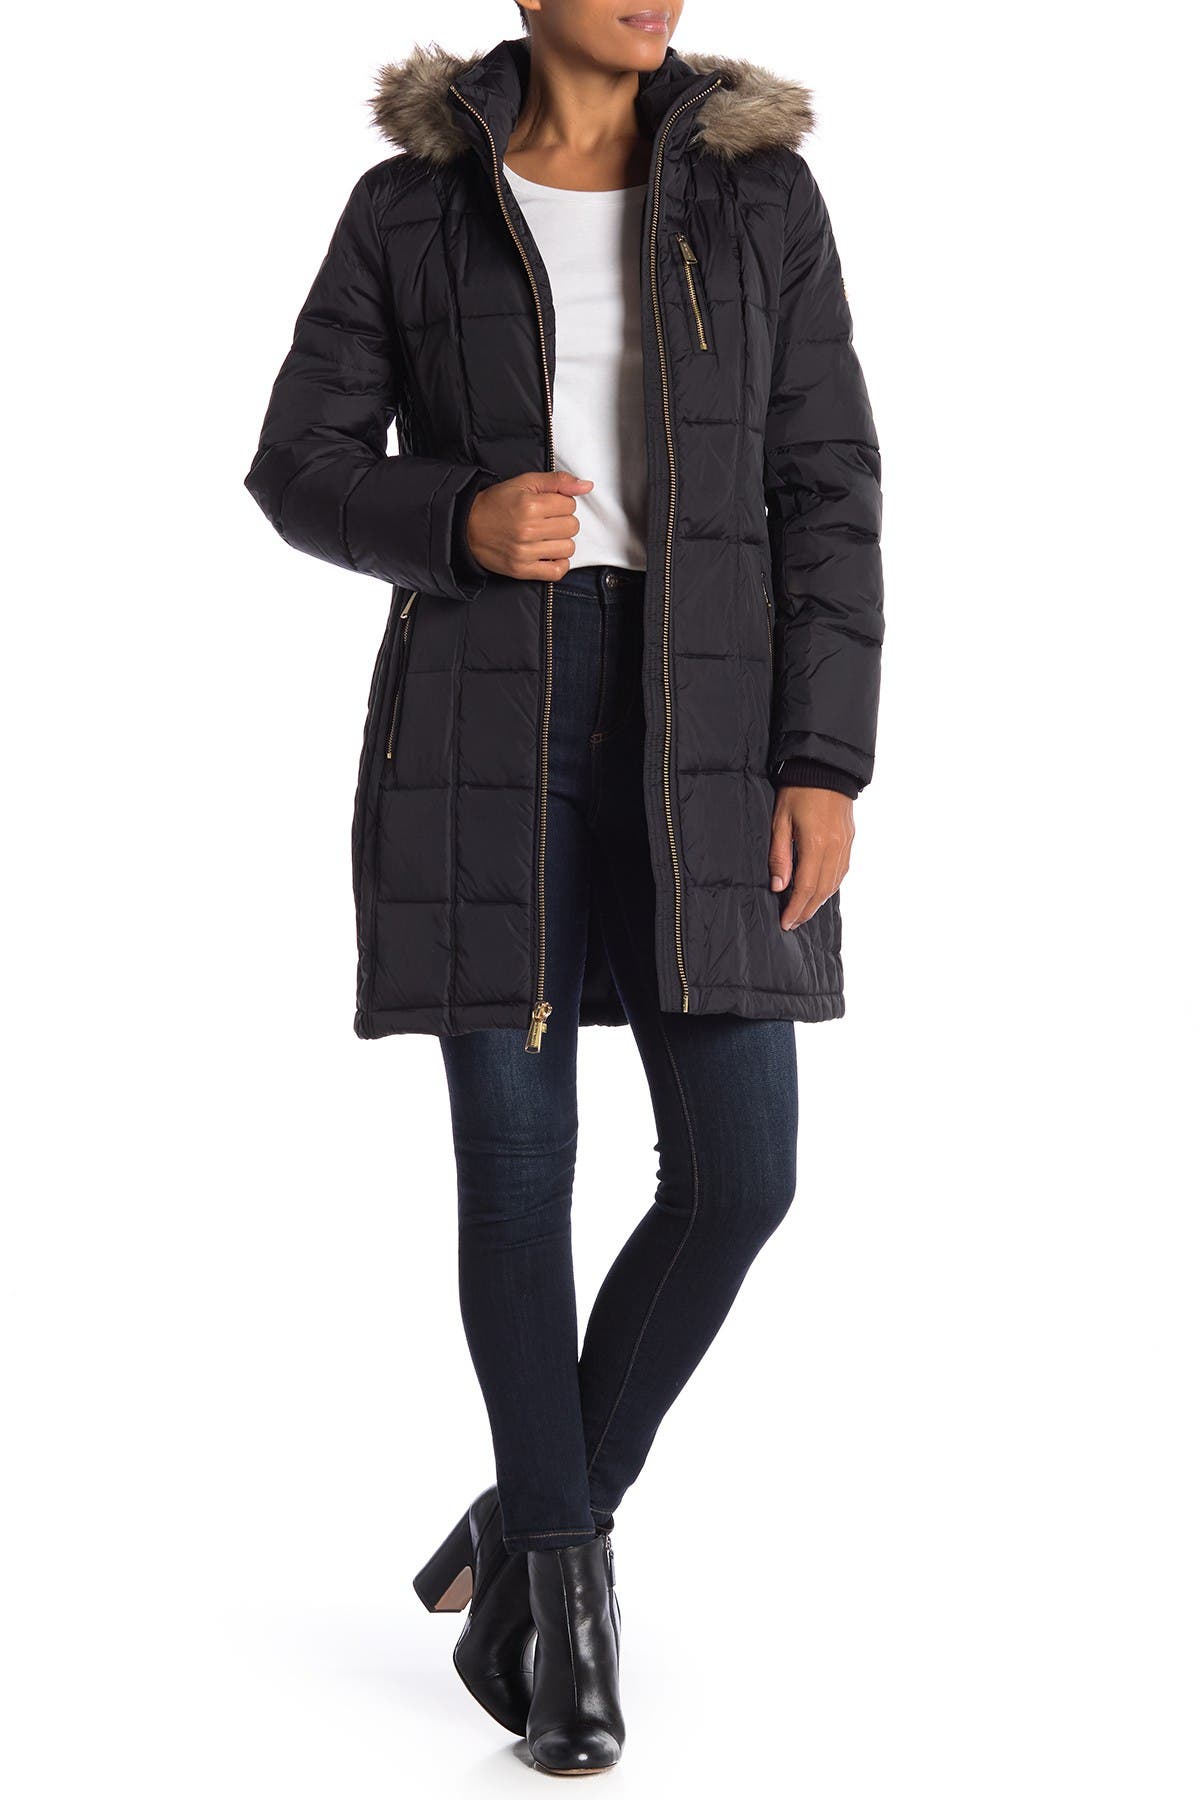 missy front zip faux fur collared jacket